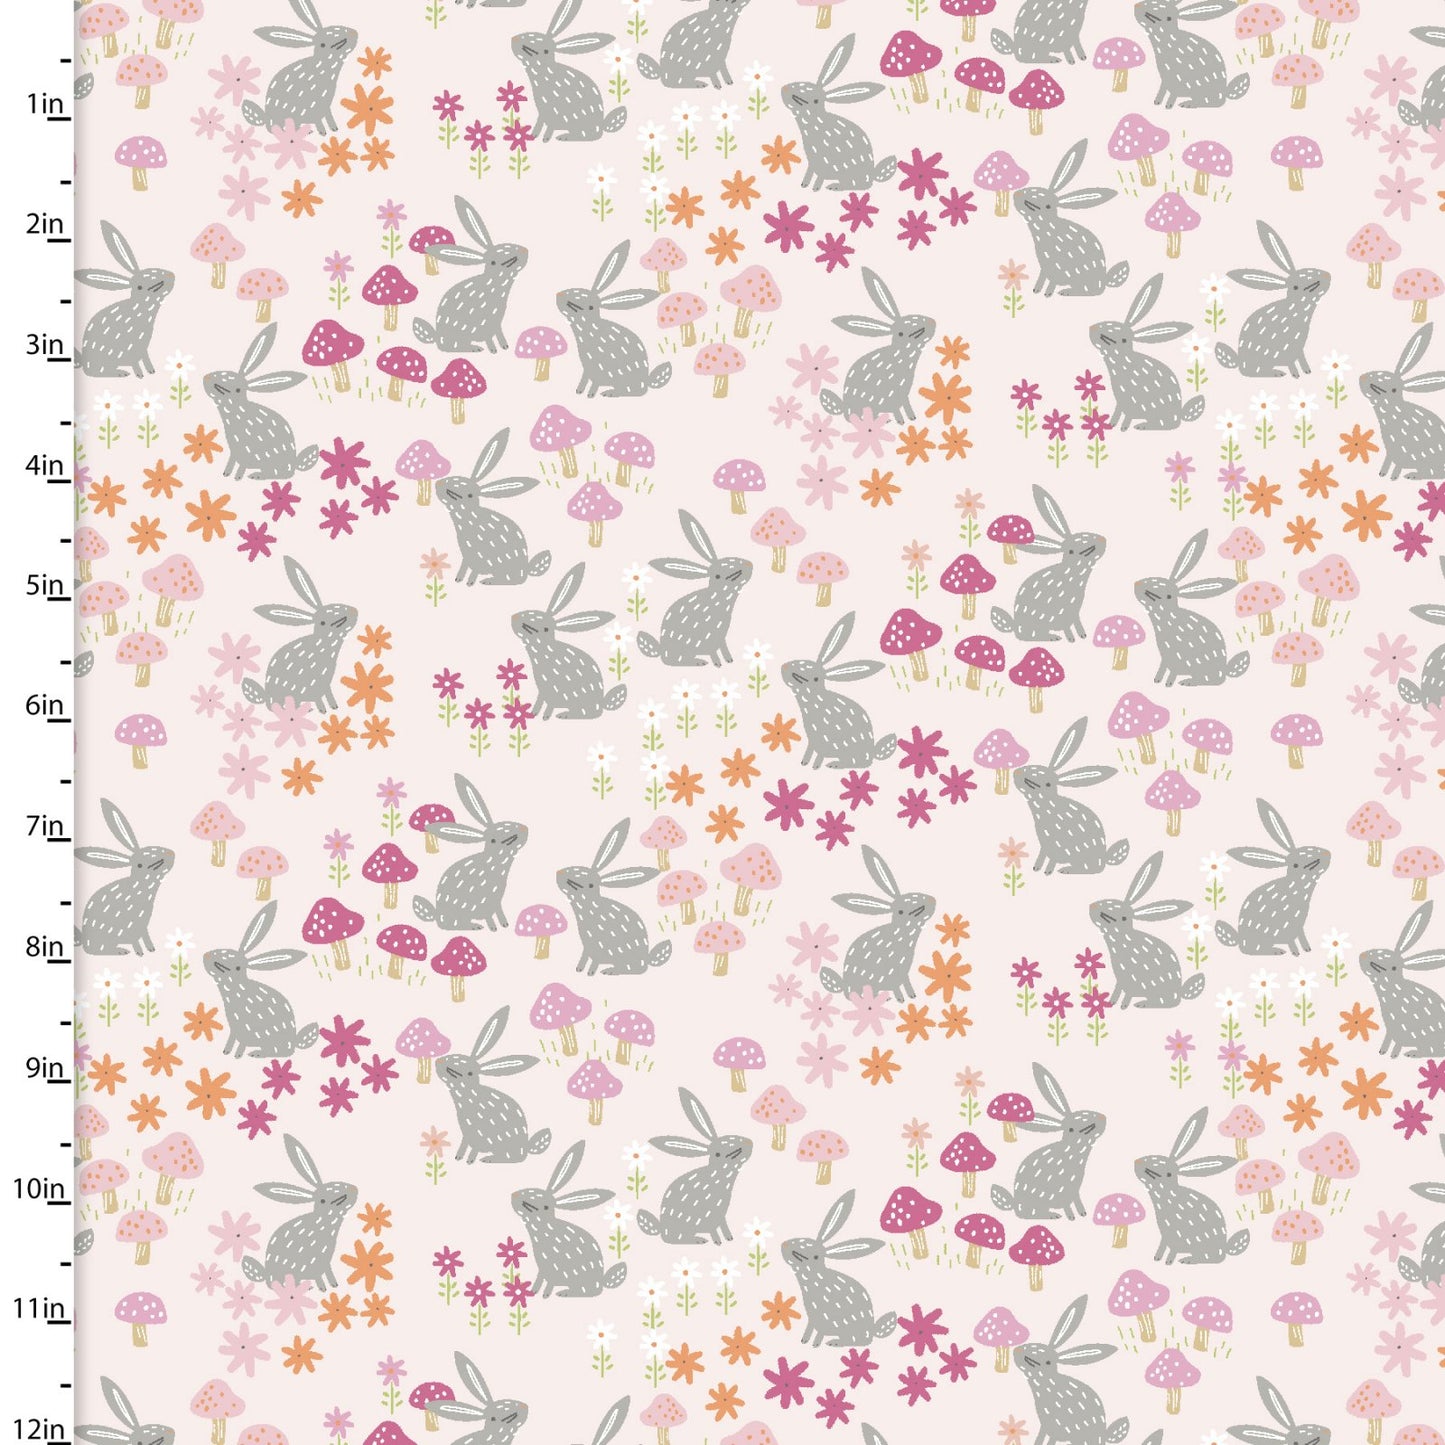 Last cut 19” x Width of fabric - Flannel - 3 Wishes - Friendship Forest - Bunny Field - Pink